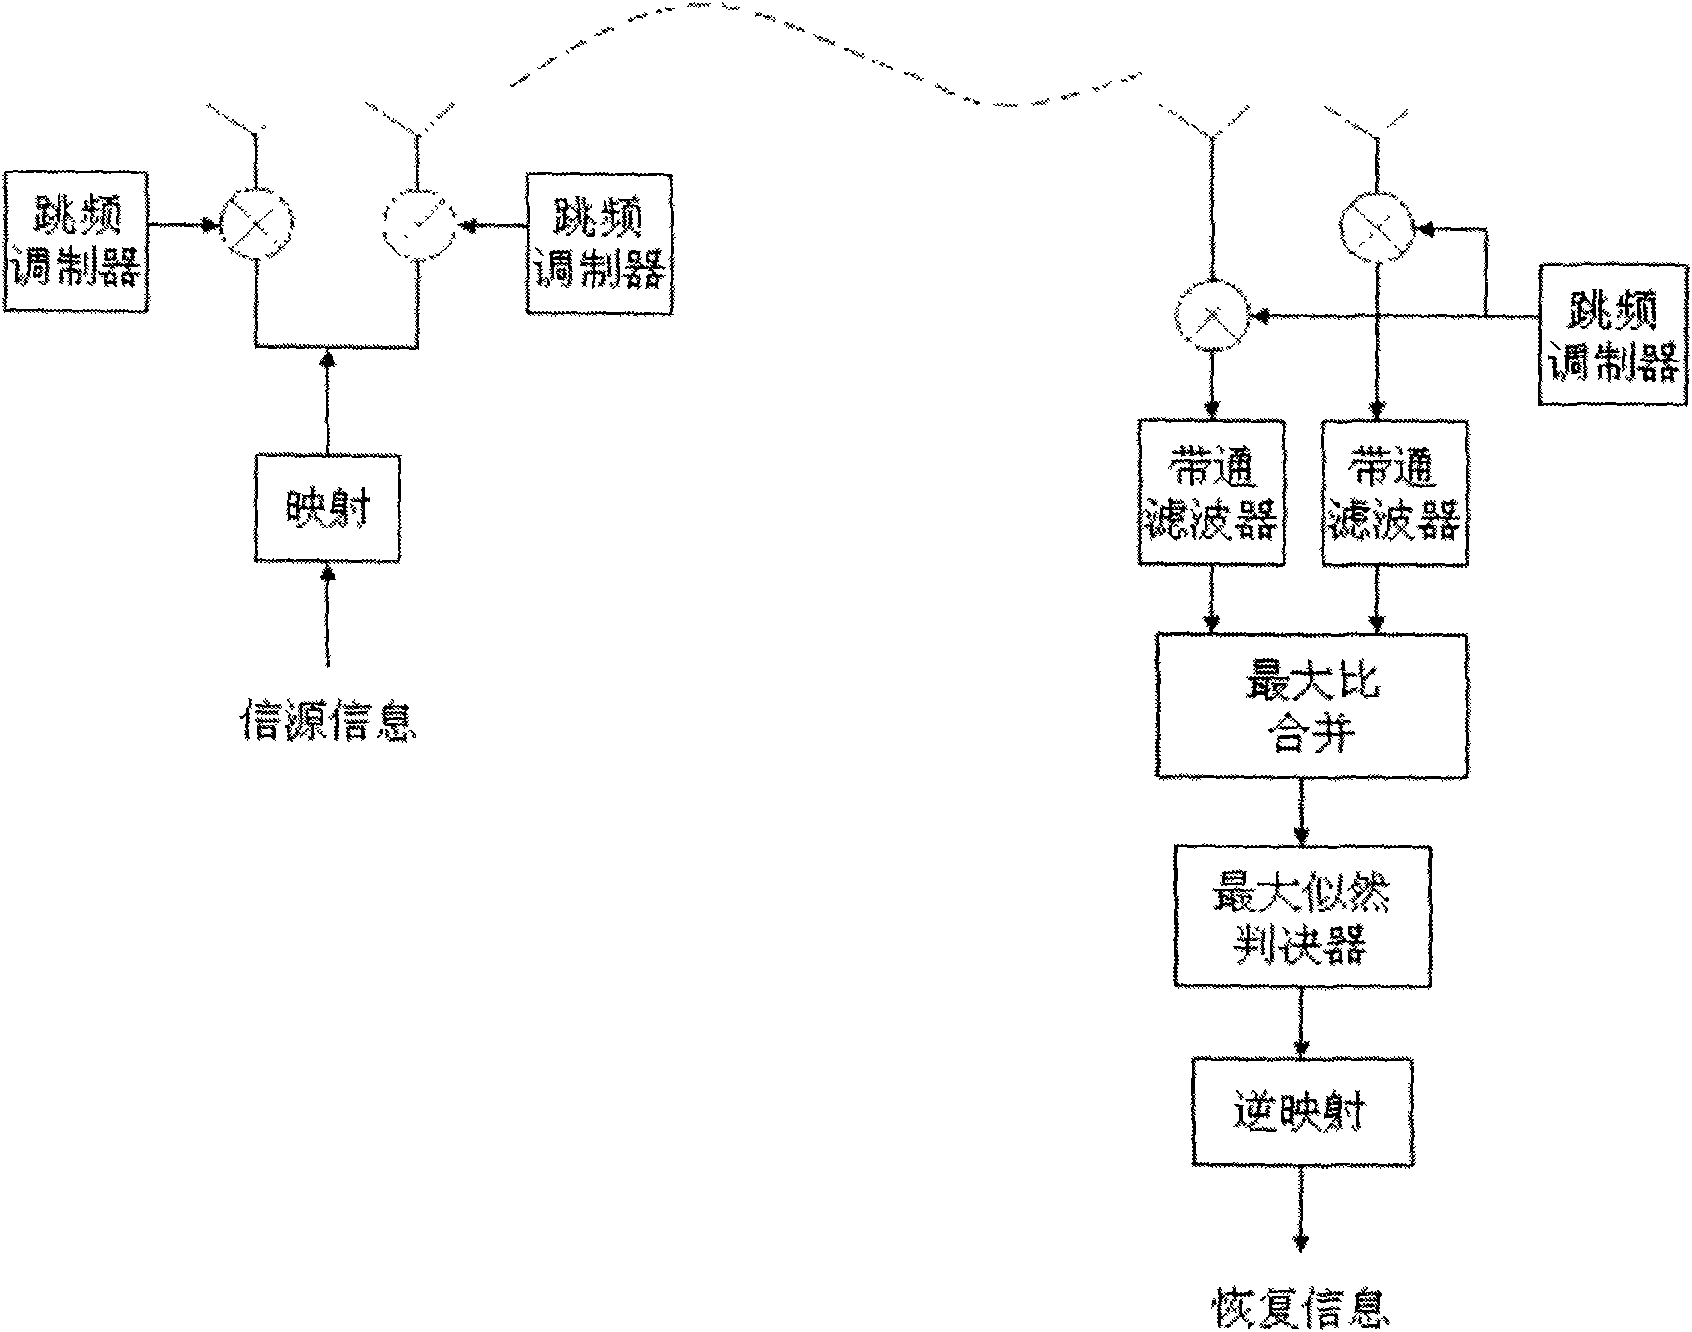 Communication method of fast frequency hopping multi-transmitting and multi-receiving system based on high-speed bus and GPU (Graphic Processing Unit)